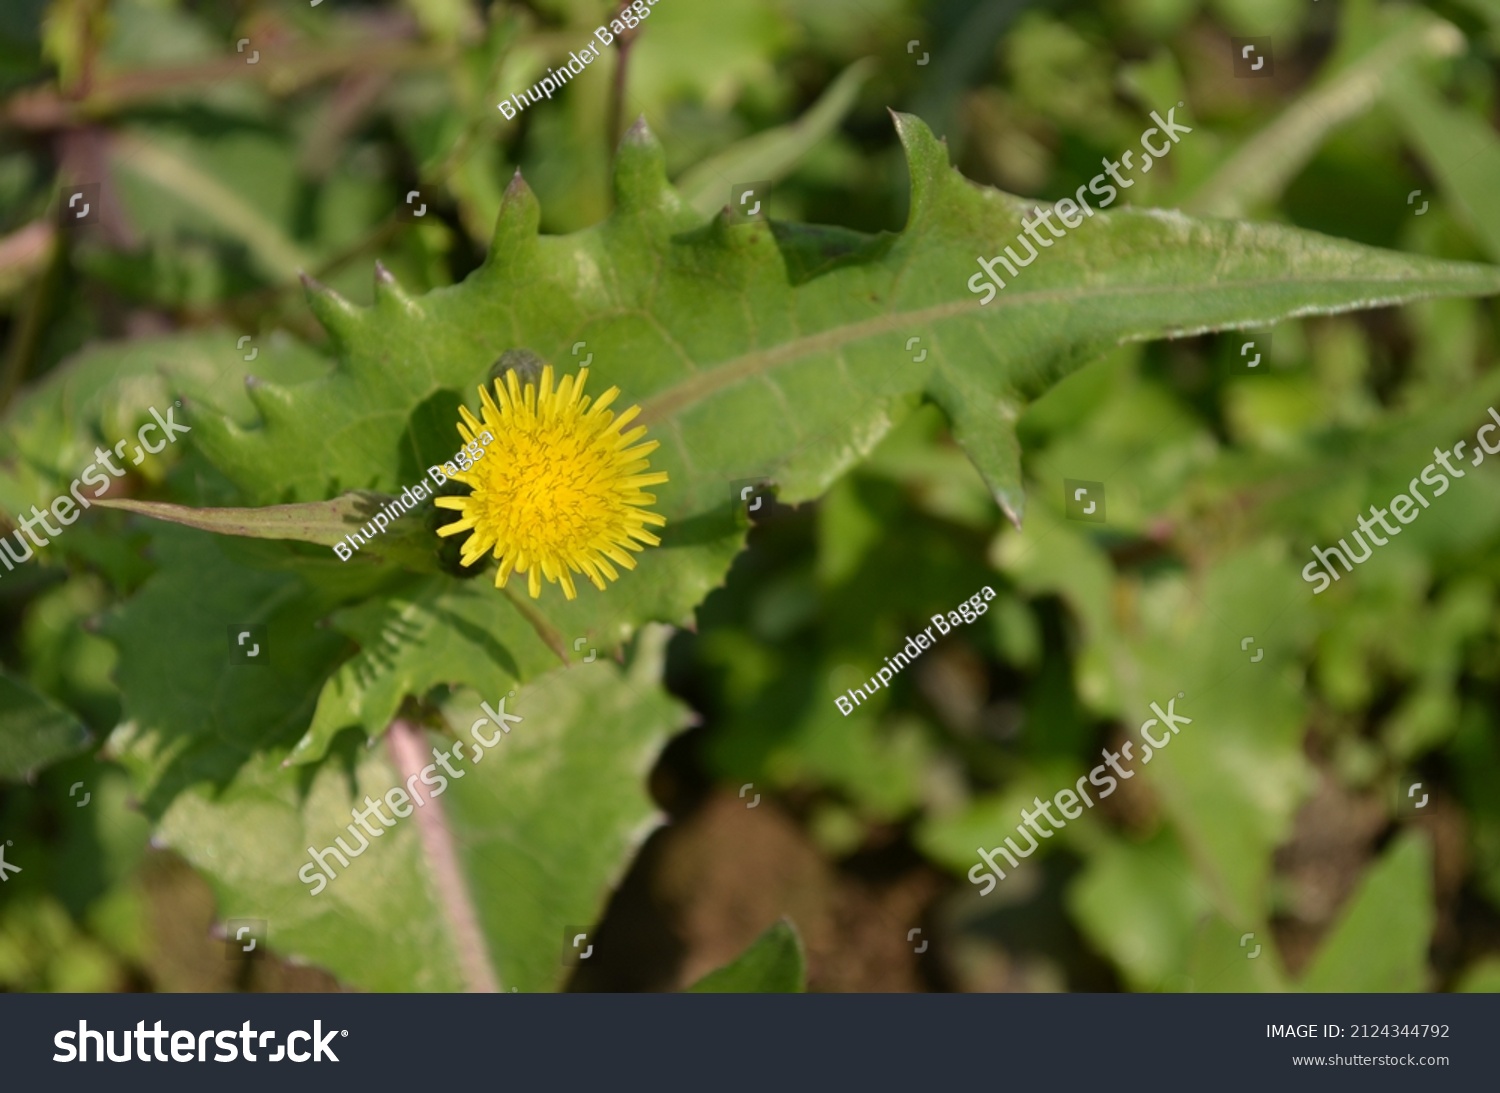 Sonchus oleraceus is a species of flowering plant in the dandelion tribe Cichorieae of the Daisy family Asteraceae. It has many common names including common, annual, or smooth sowthistle #2124344792